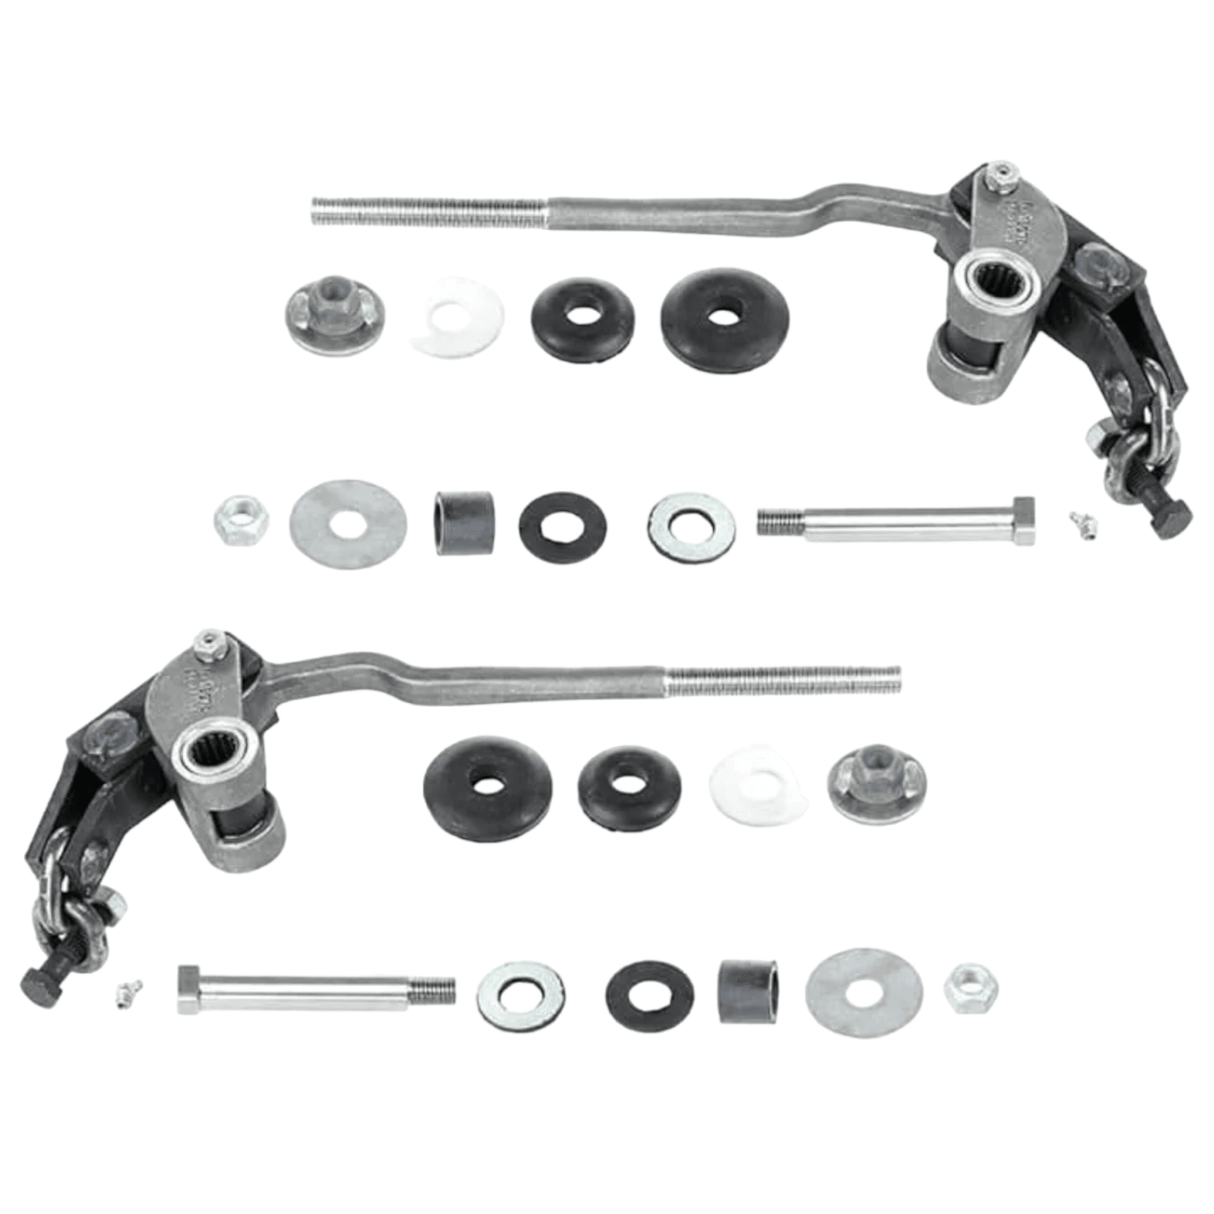 48100215 Saf Holland Neway Suspension Lift Axle Lower Cam Repair Kit - Truck To Trailer